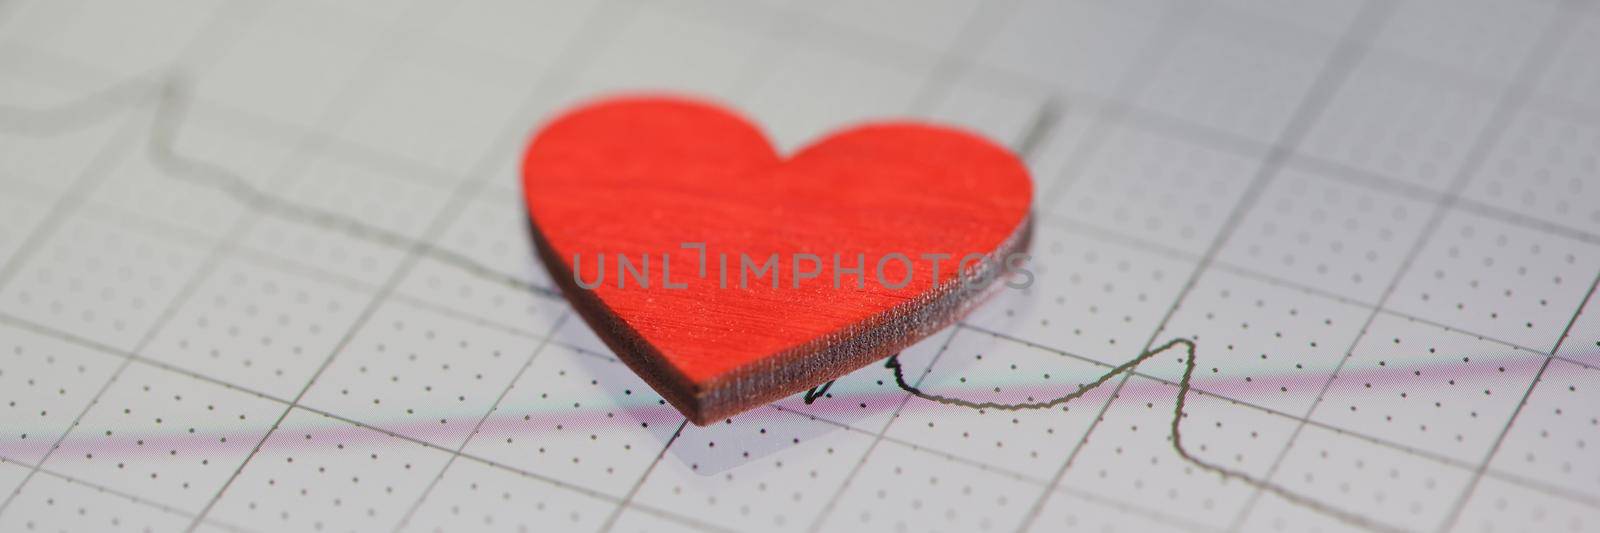 Toy red heart lying on paper with electrocardiogram closeup by kuprevich